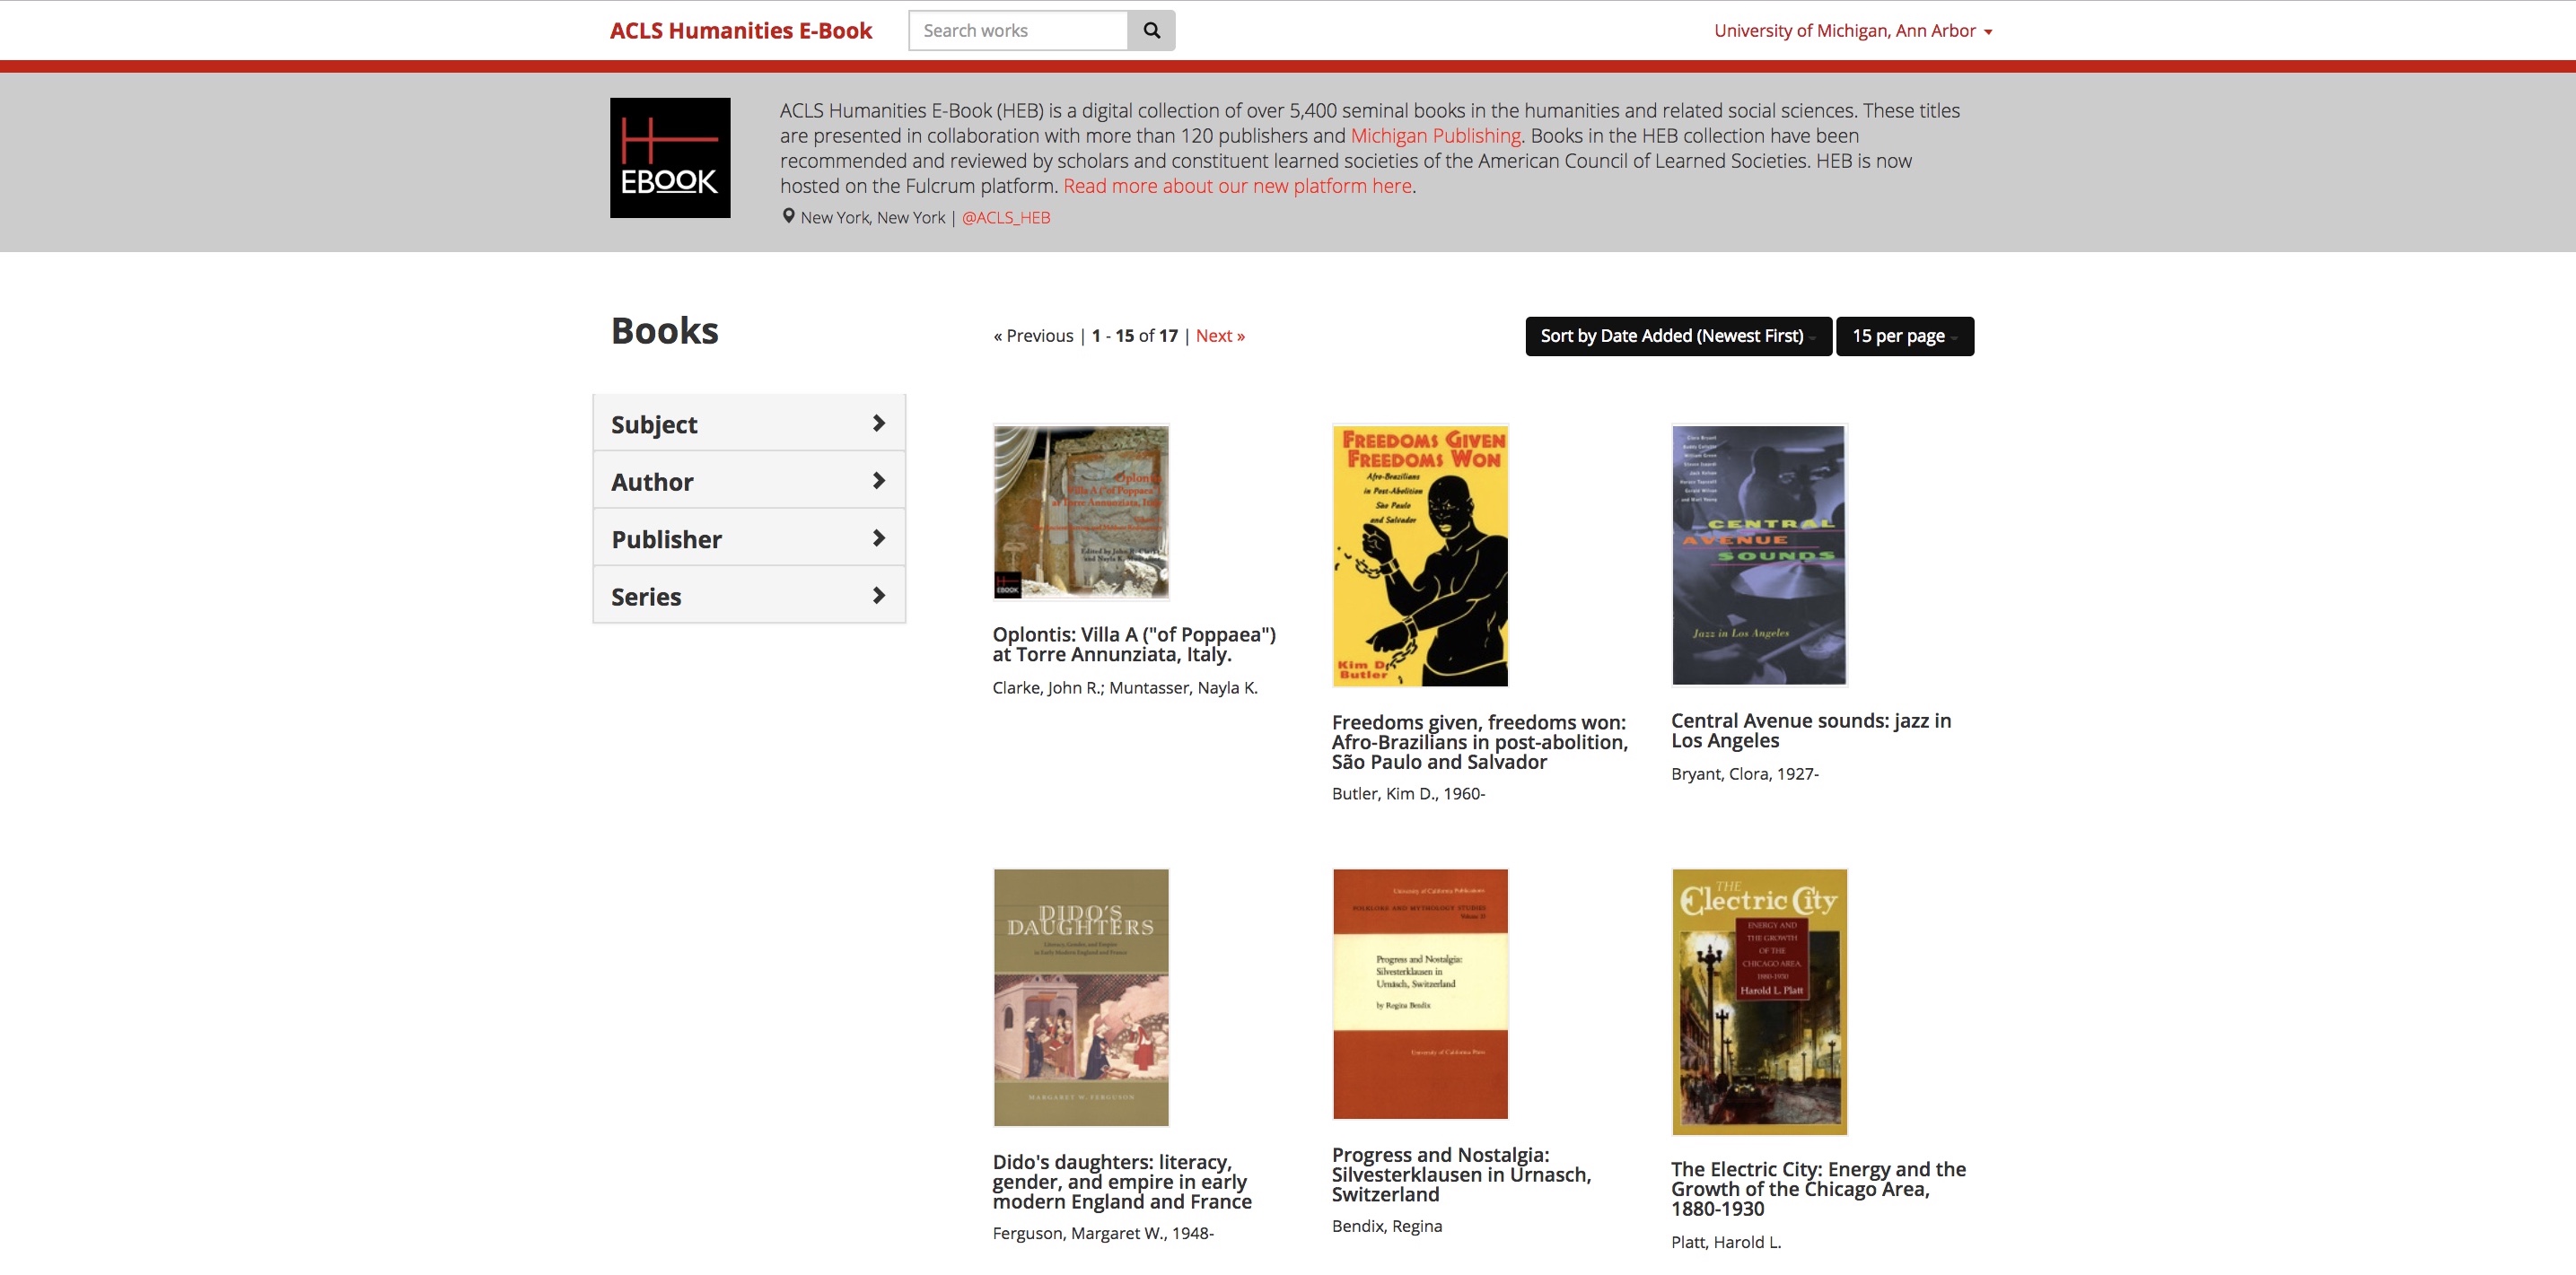 A screenshot of the updated catalog page of Humanities E-Book, displaying book covers and browse filters.